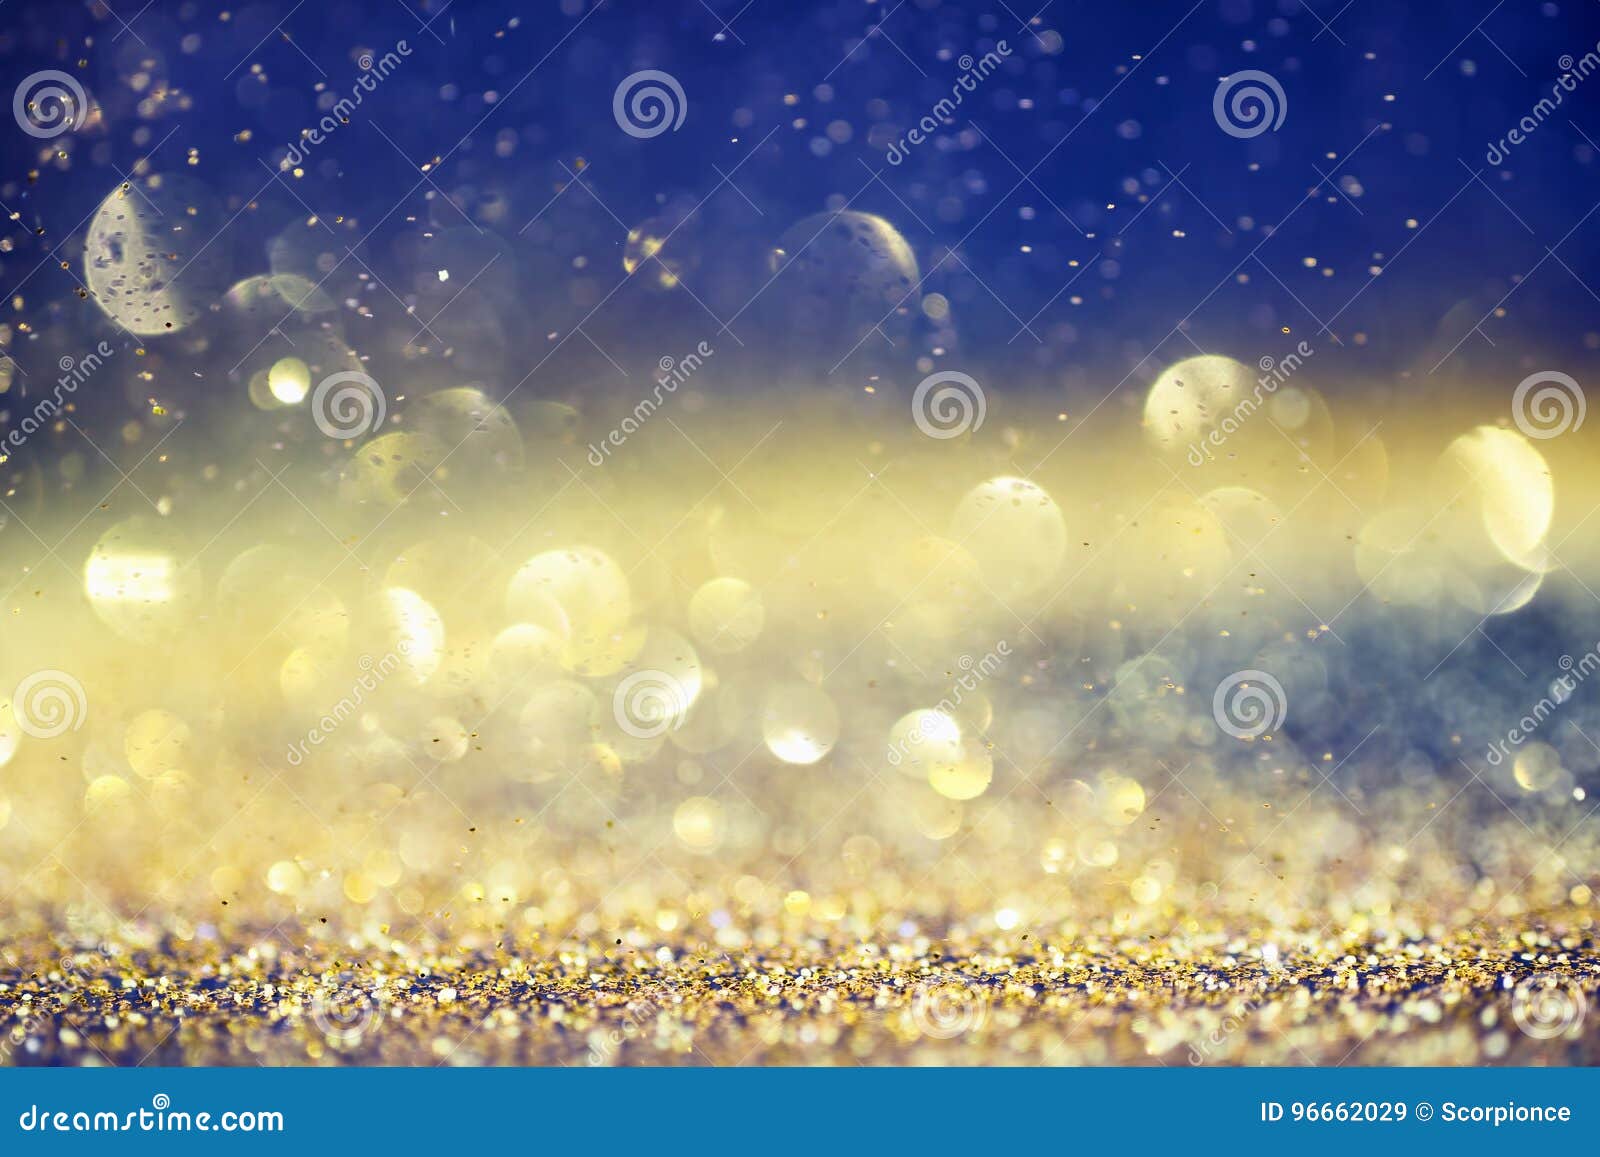 glamourous luxury golden and blue bokeh background